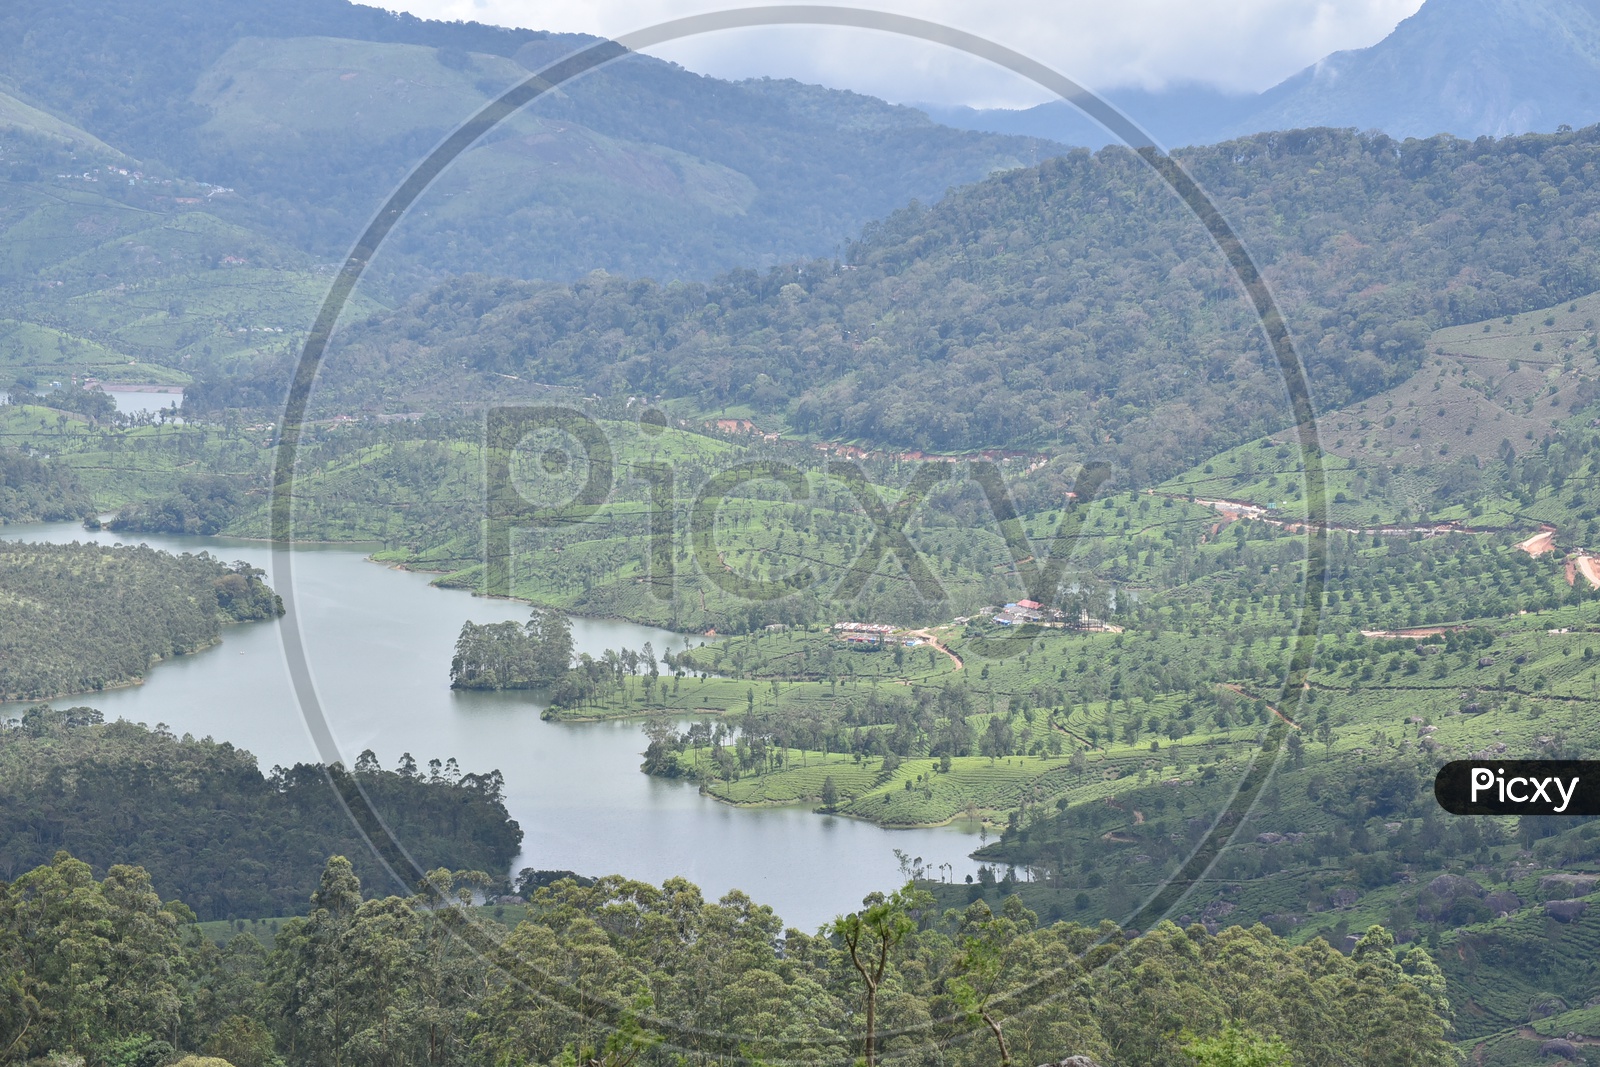 Beautiful Landscape of Munnar mountains with river flowing from the center